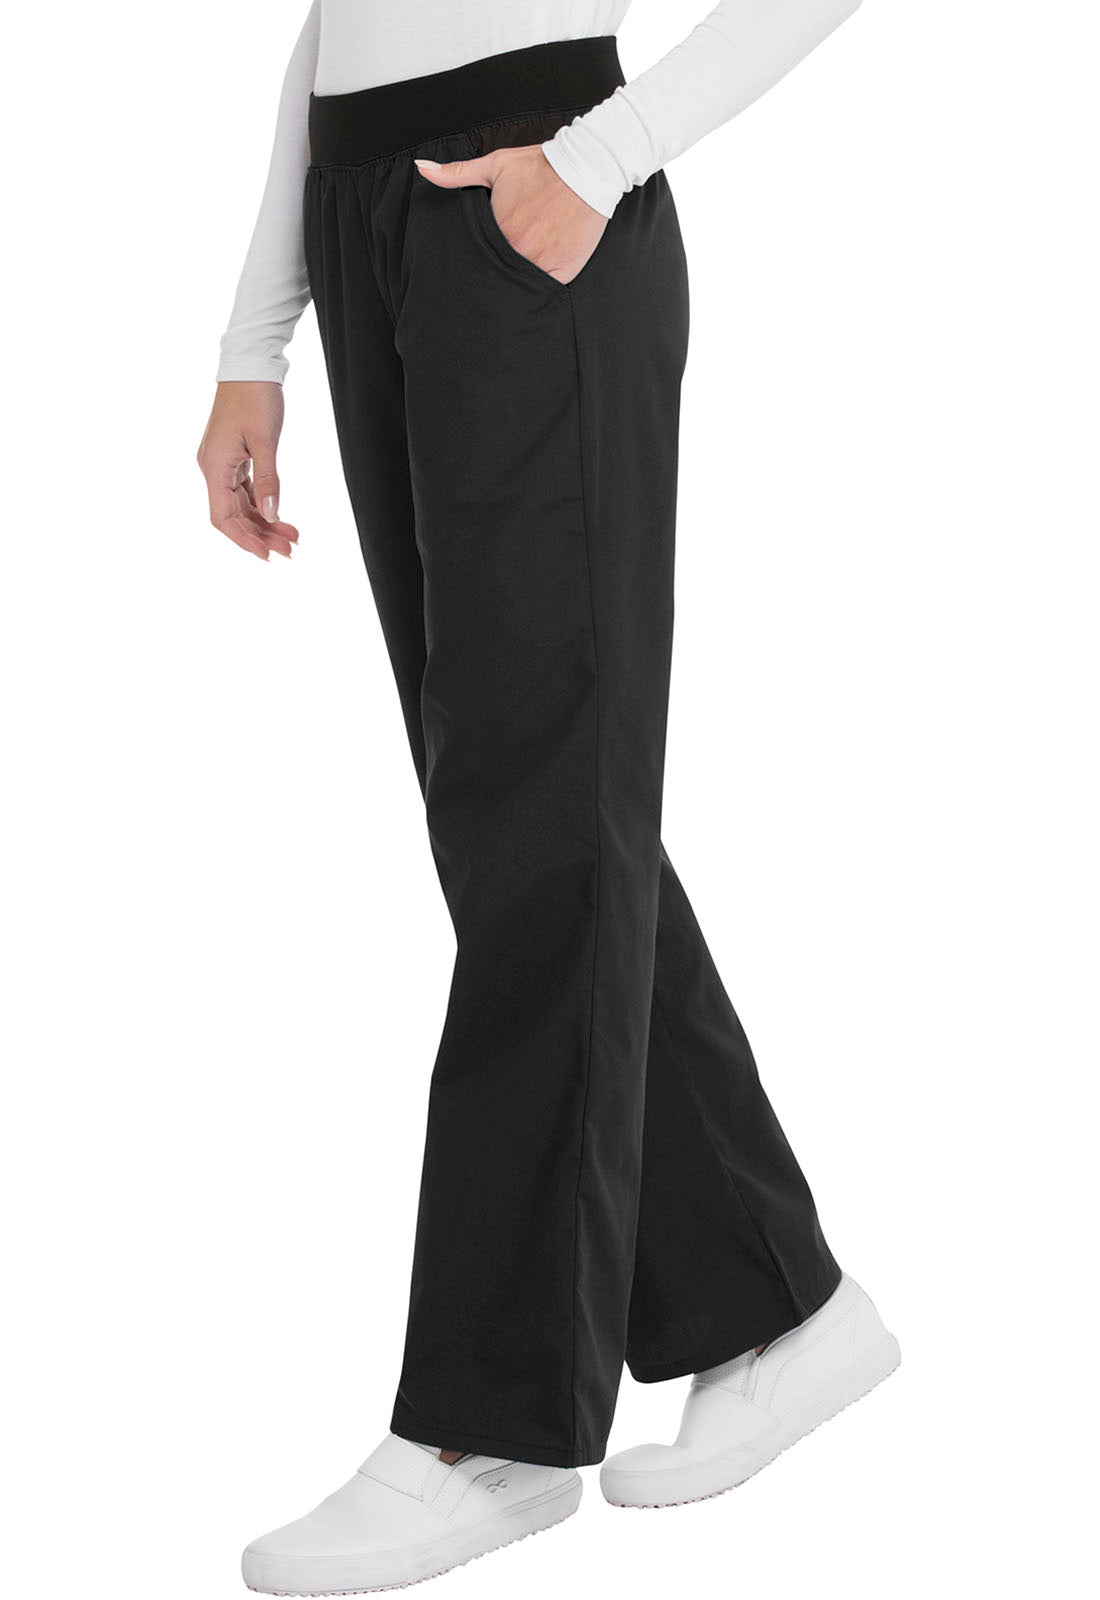 Cherokee Flexibles Mid Rise Knit Waist Pull-On Pant in Black-DOOR CRASHER PRICED!